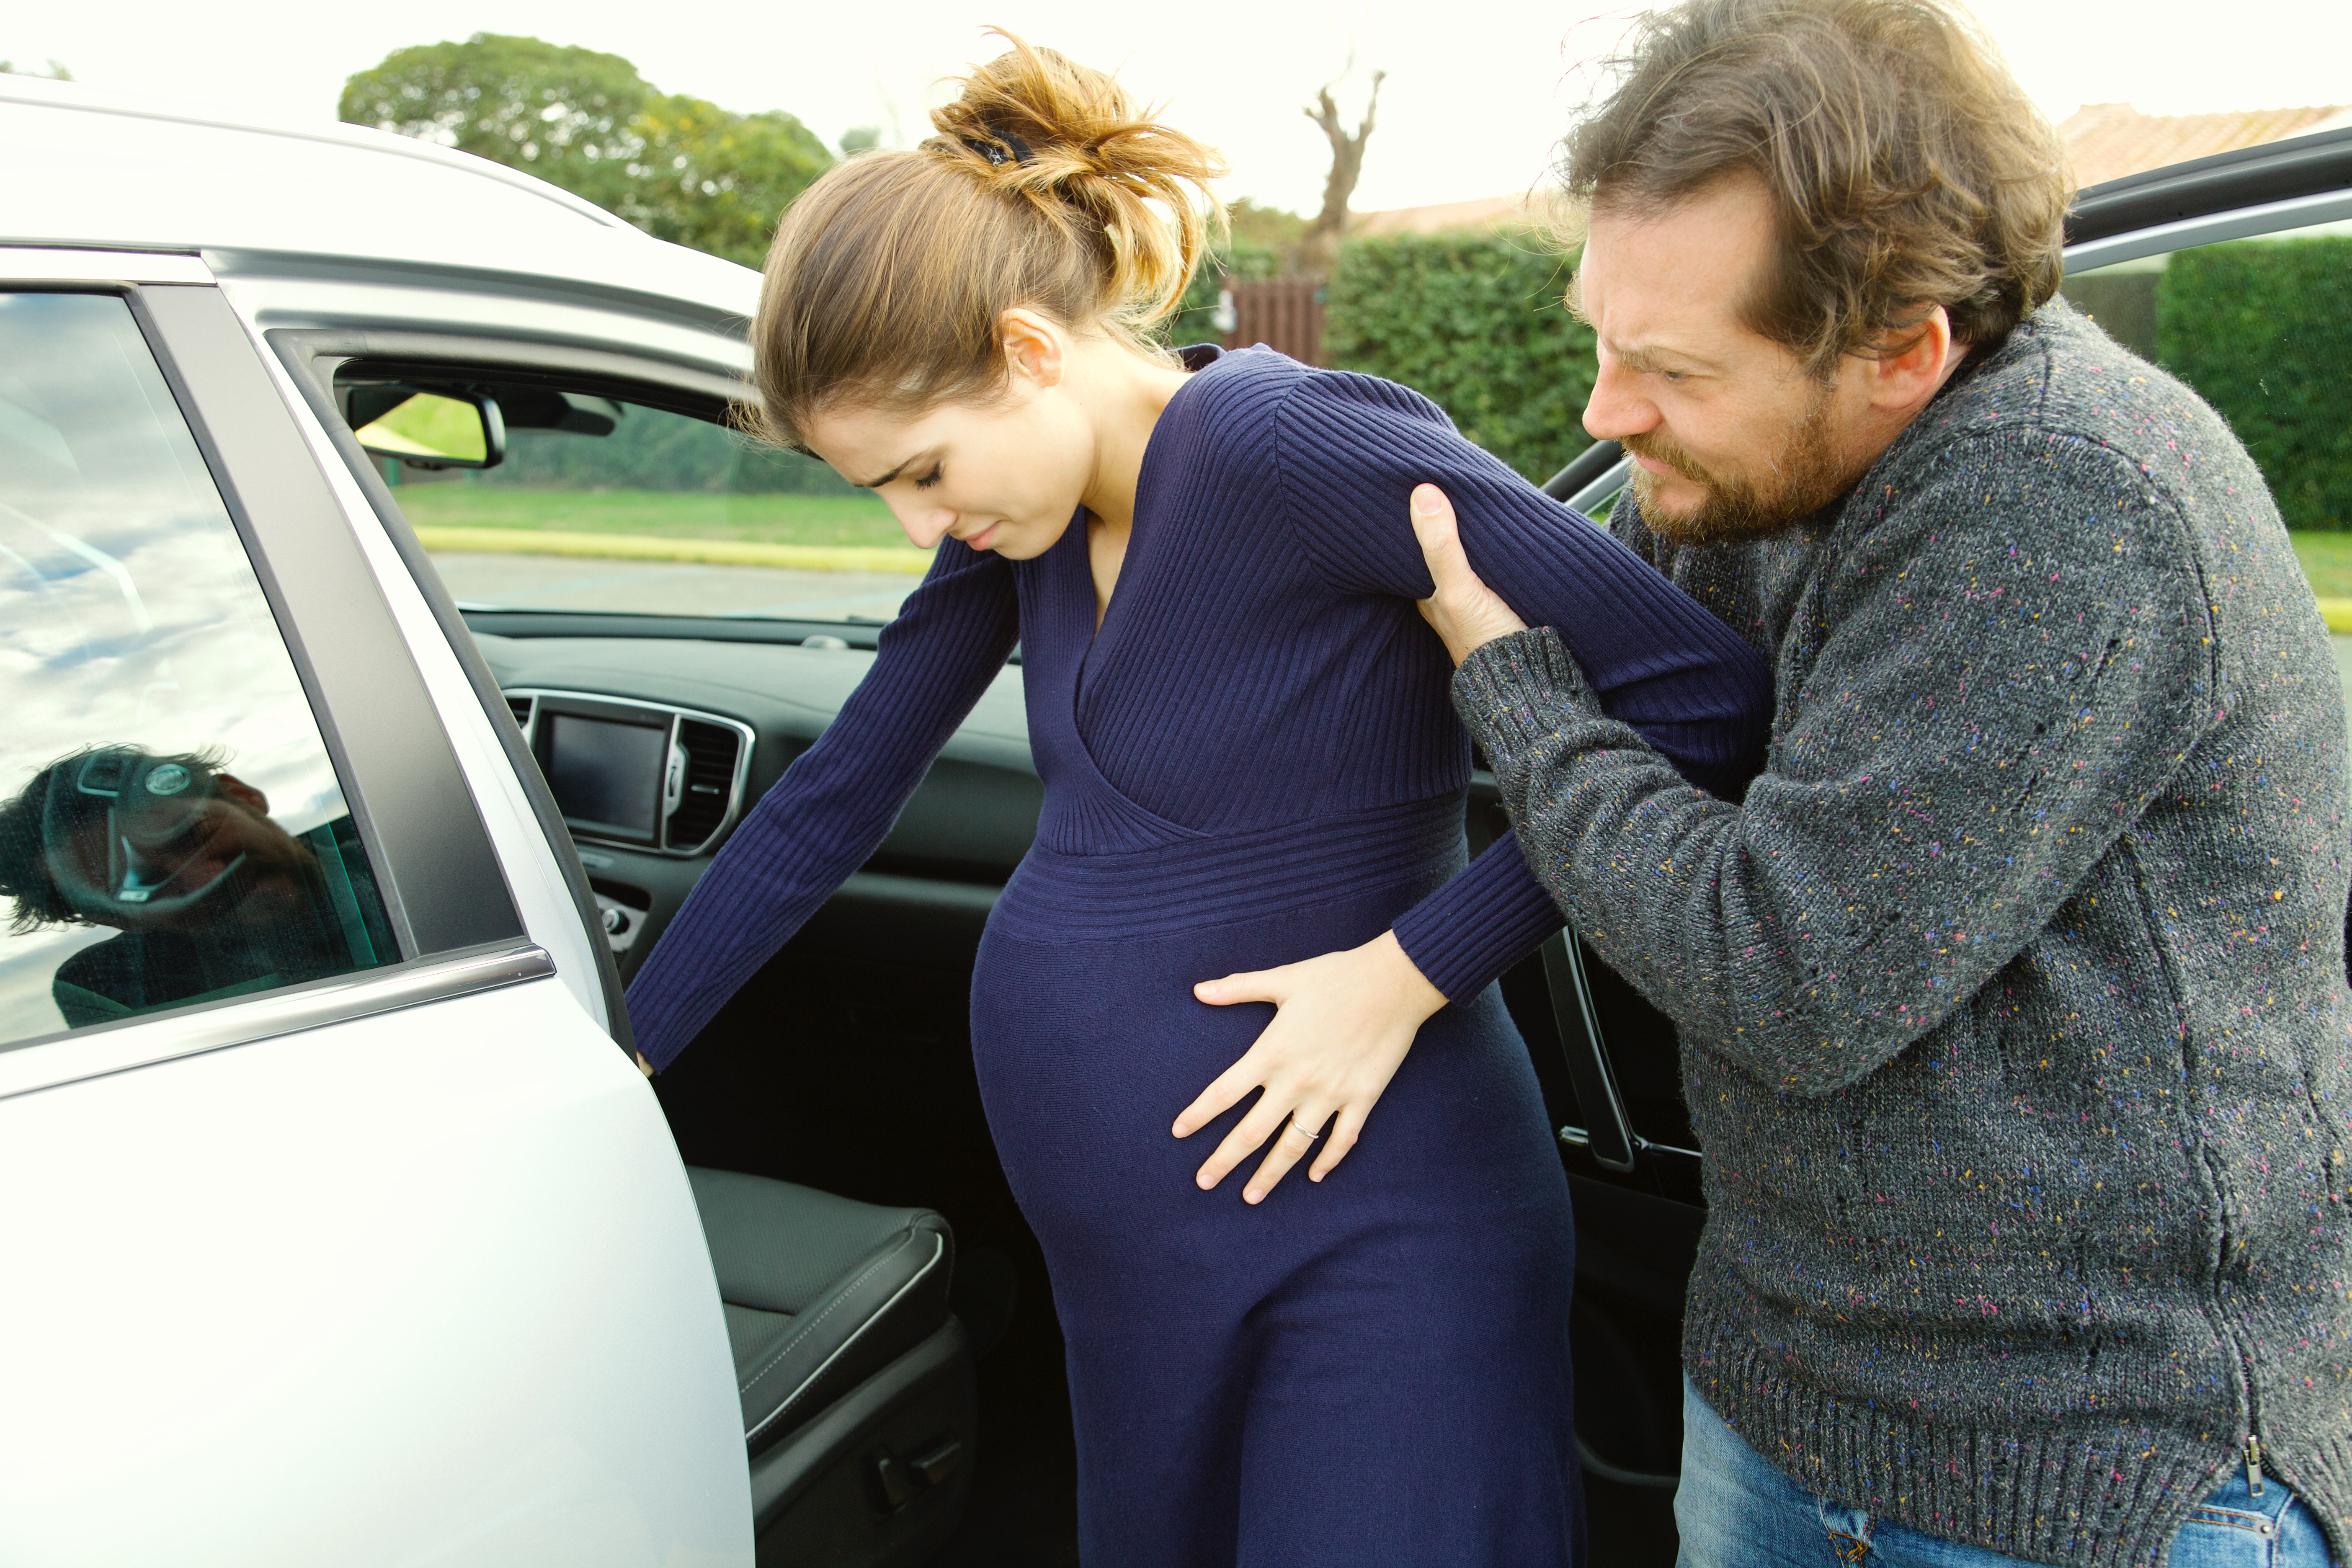 A heavily pregnant woman getting help from a man to enter a car | Source: Shutterstock